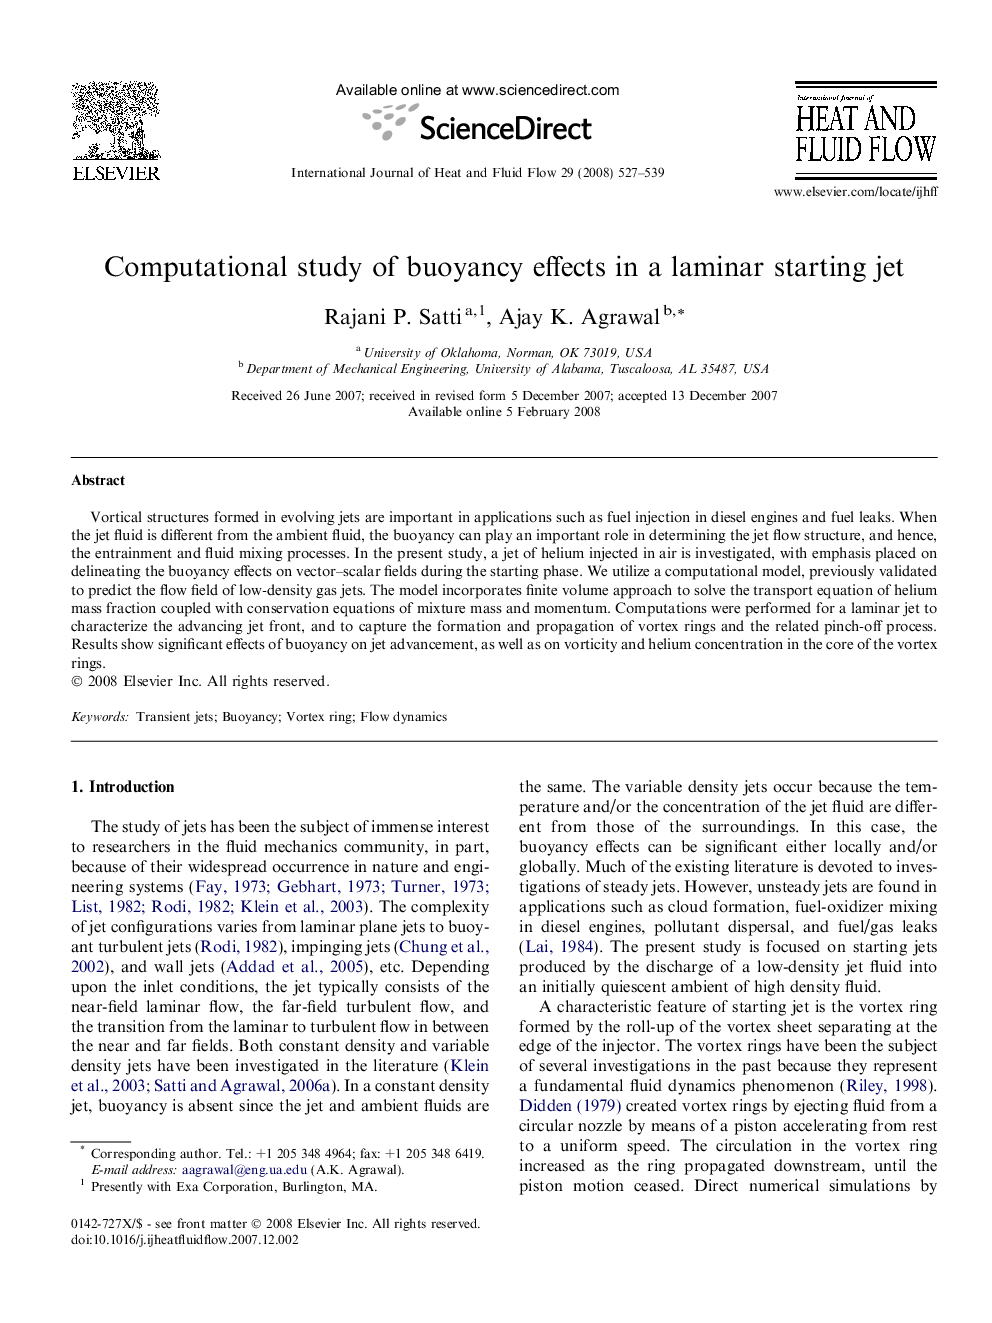 Computational study of buoyancy effects in a laminar starting jet